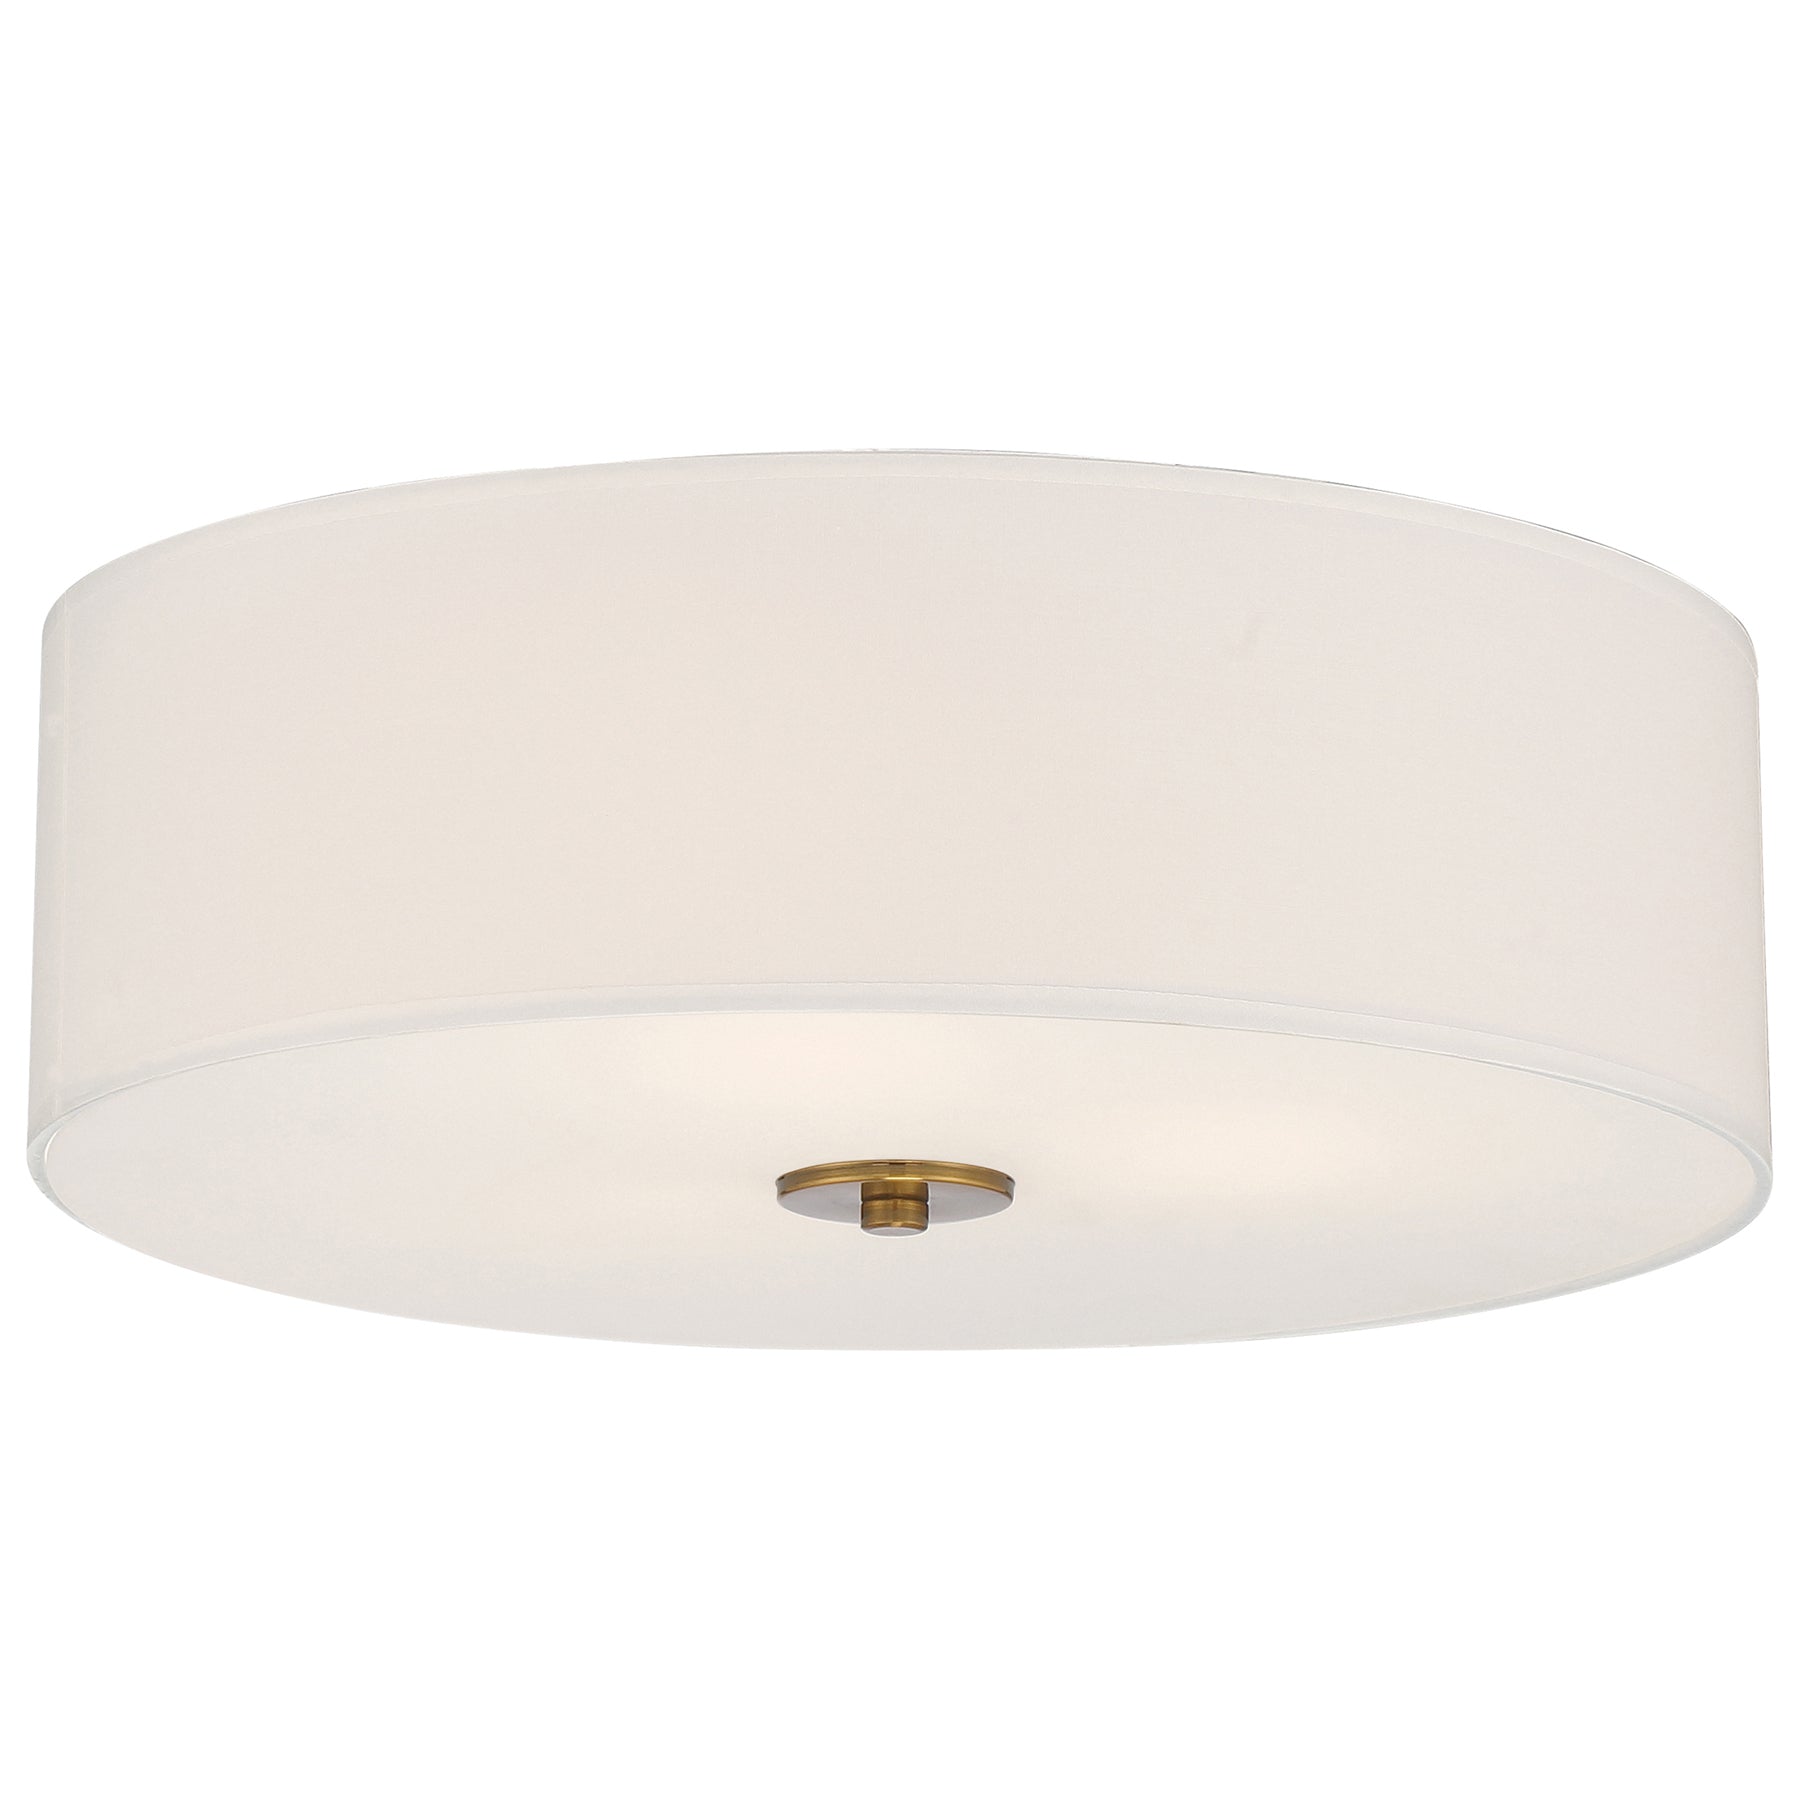 Mid Town 3 Light 18in. Flush Mount - Antique Brushed Brass